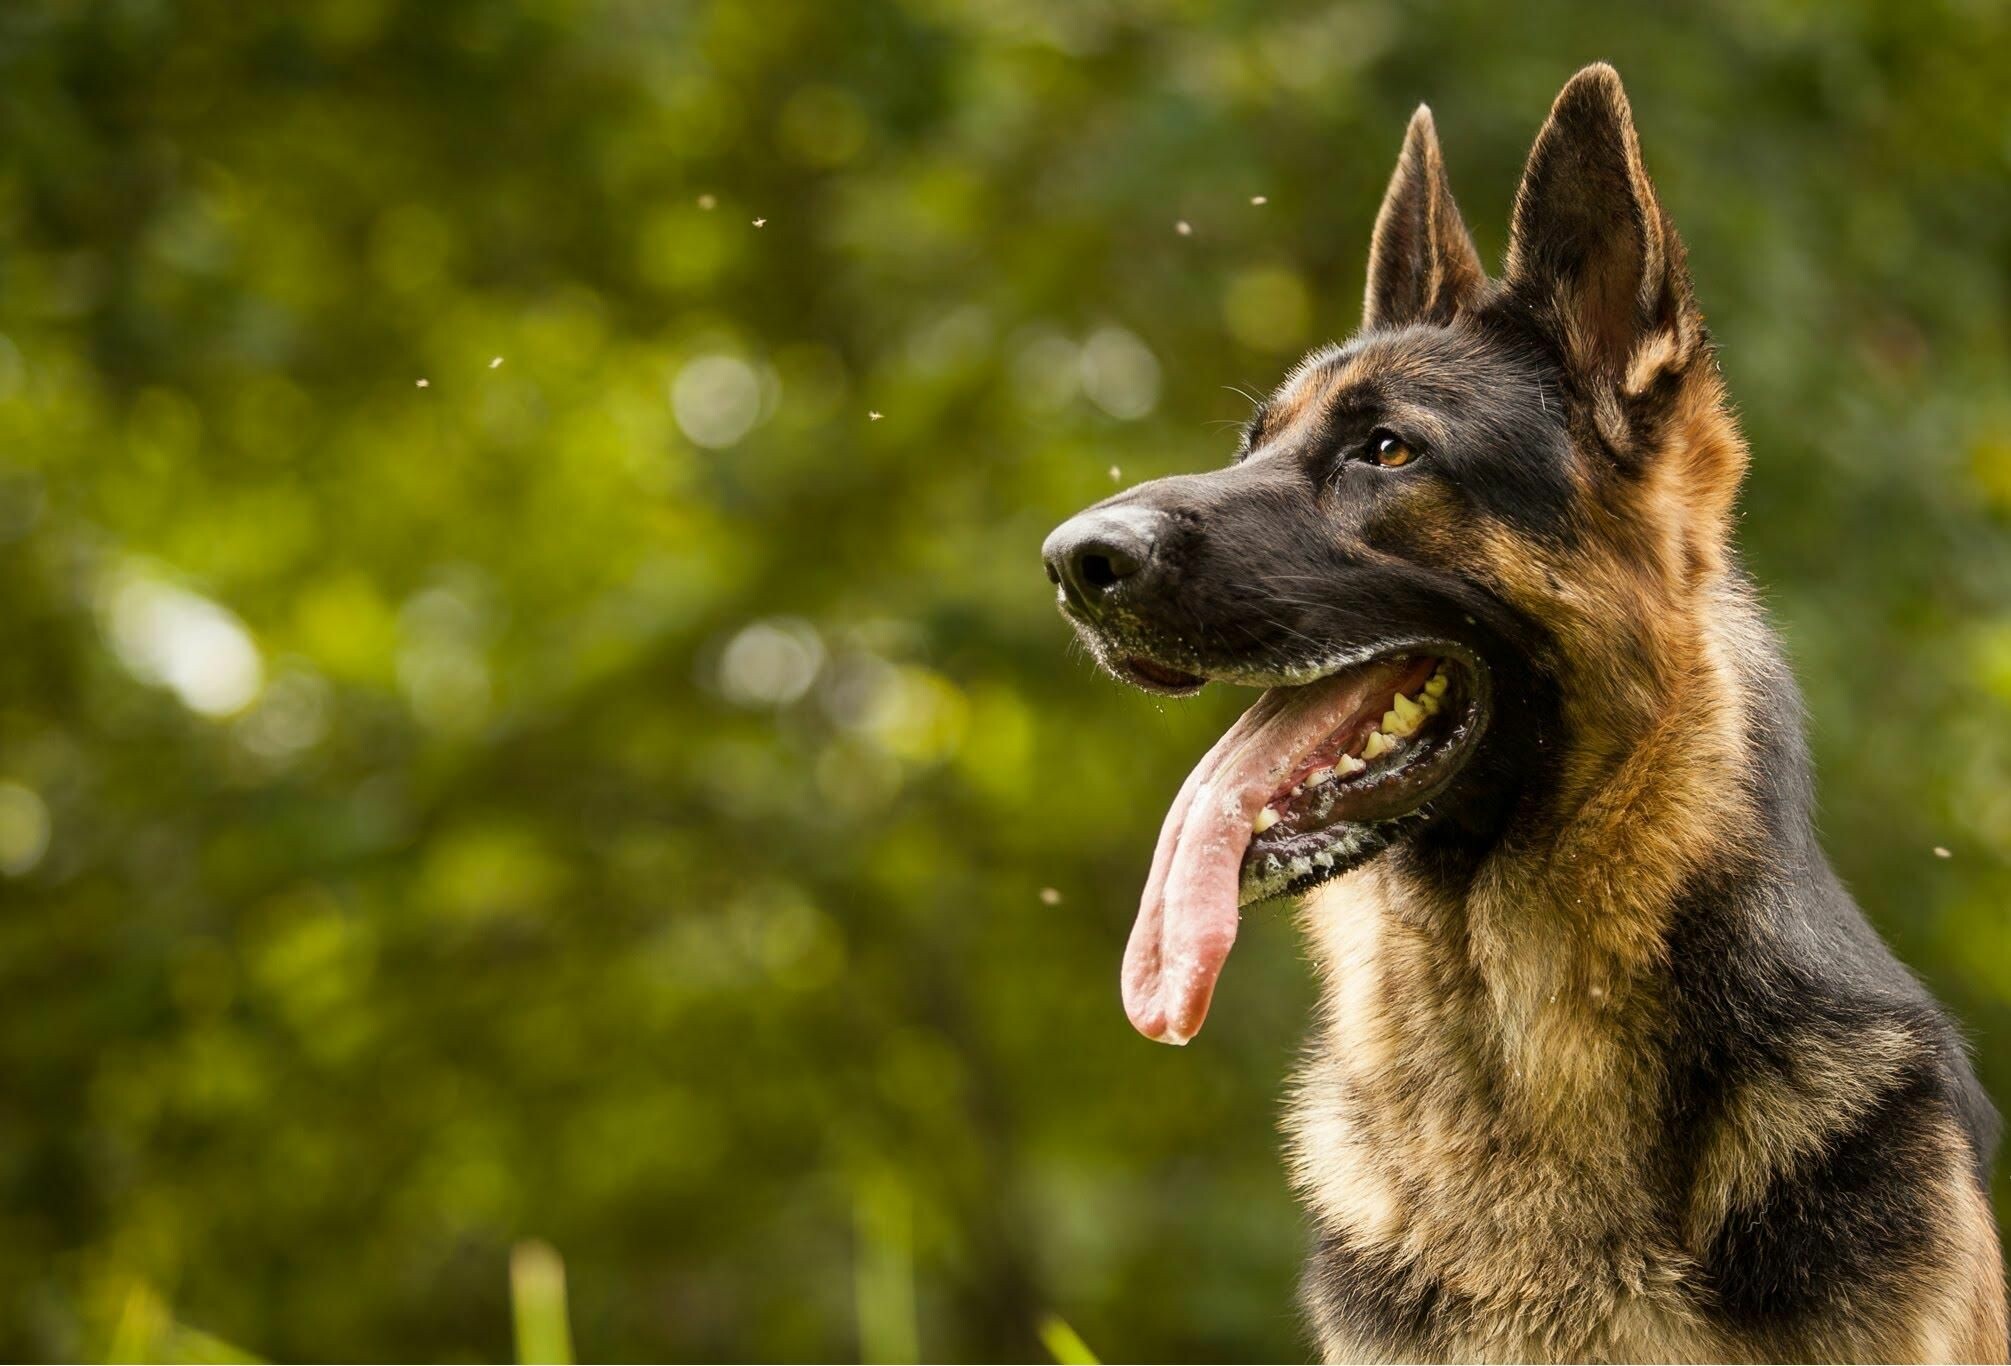 German Shepherd: The breed being used for tracking criminals, patrolling troubled areas and detection and holding of suspects. 2020x1370 HD Wallpaper.